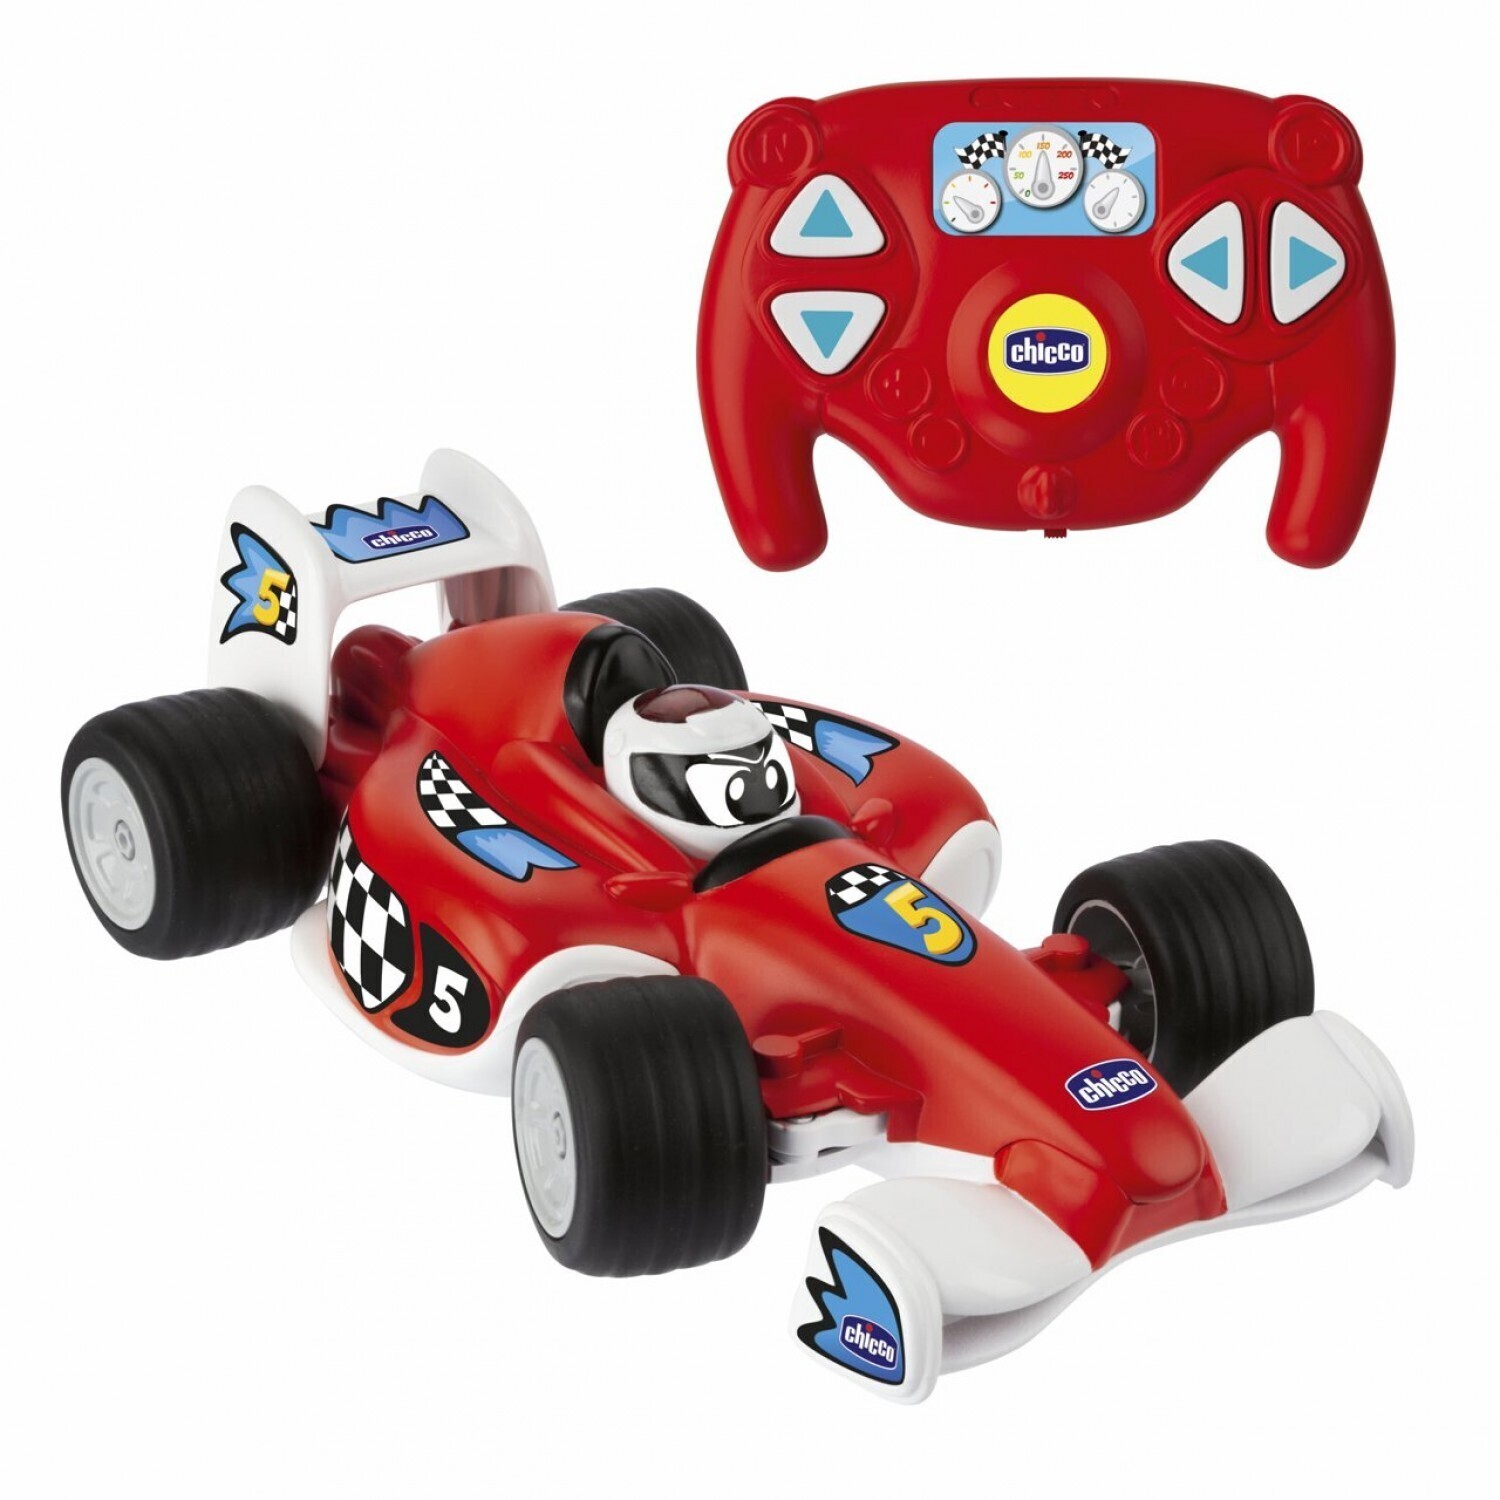 Chicco Tom Race desde 28,90 €